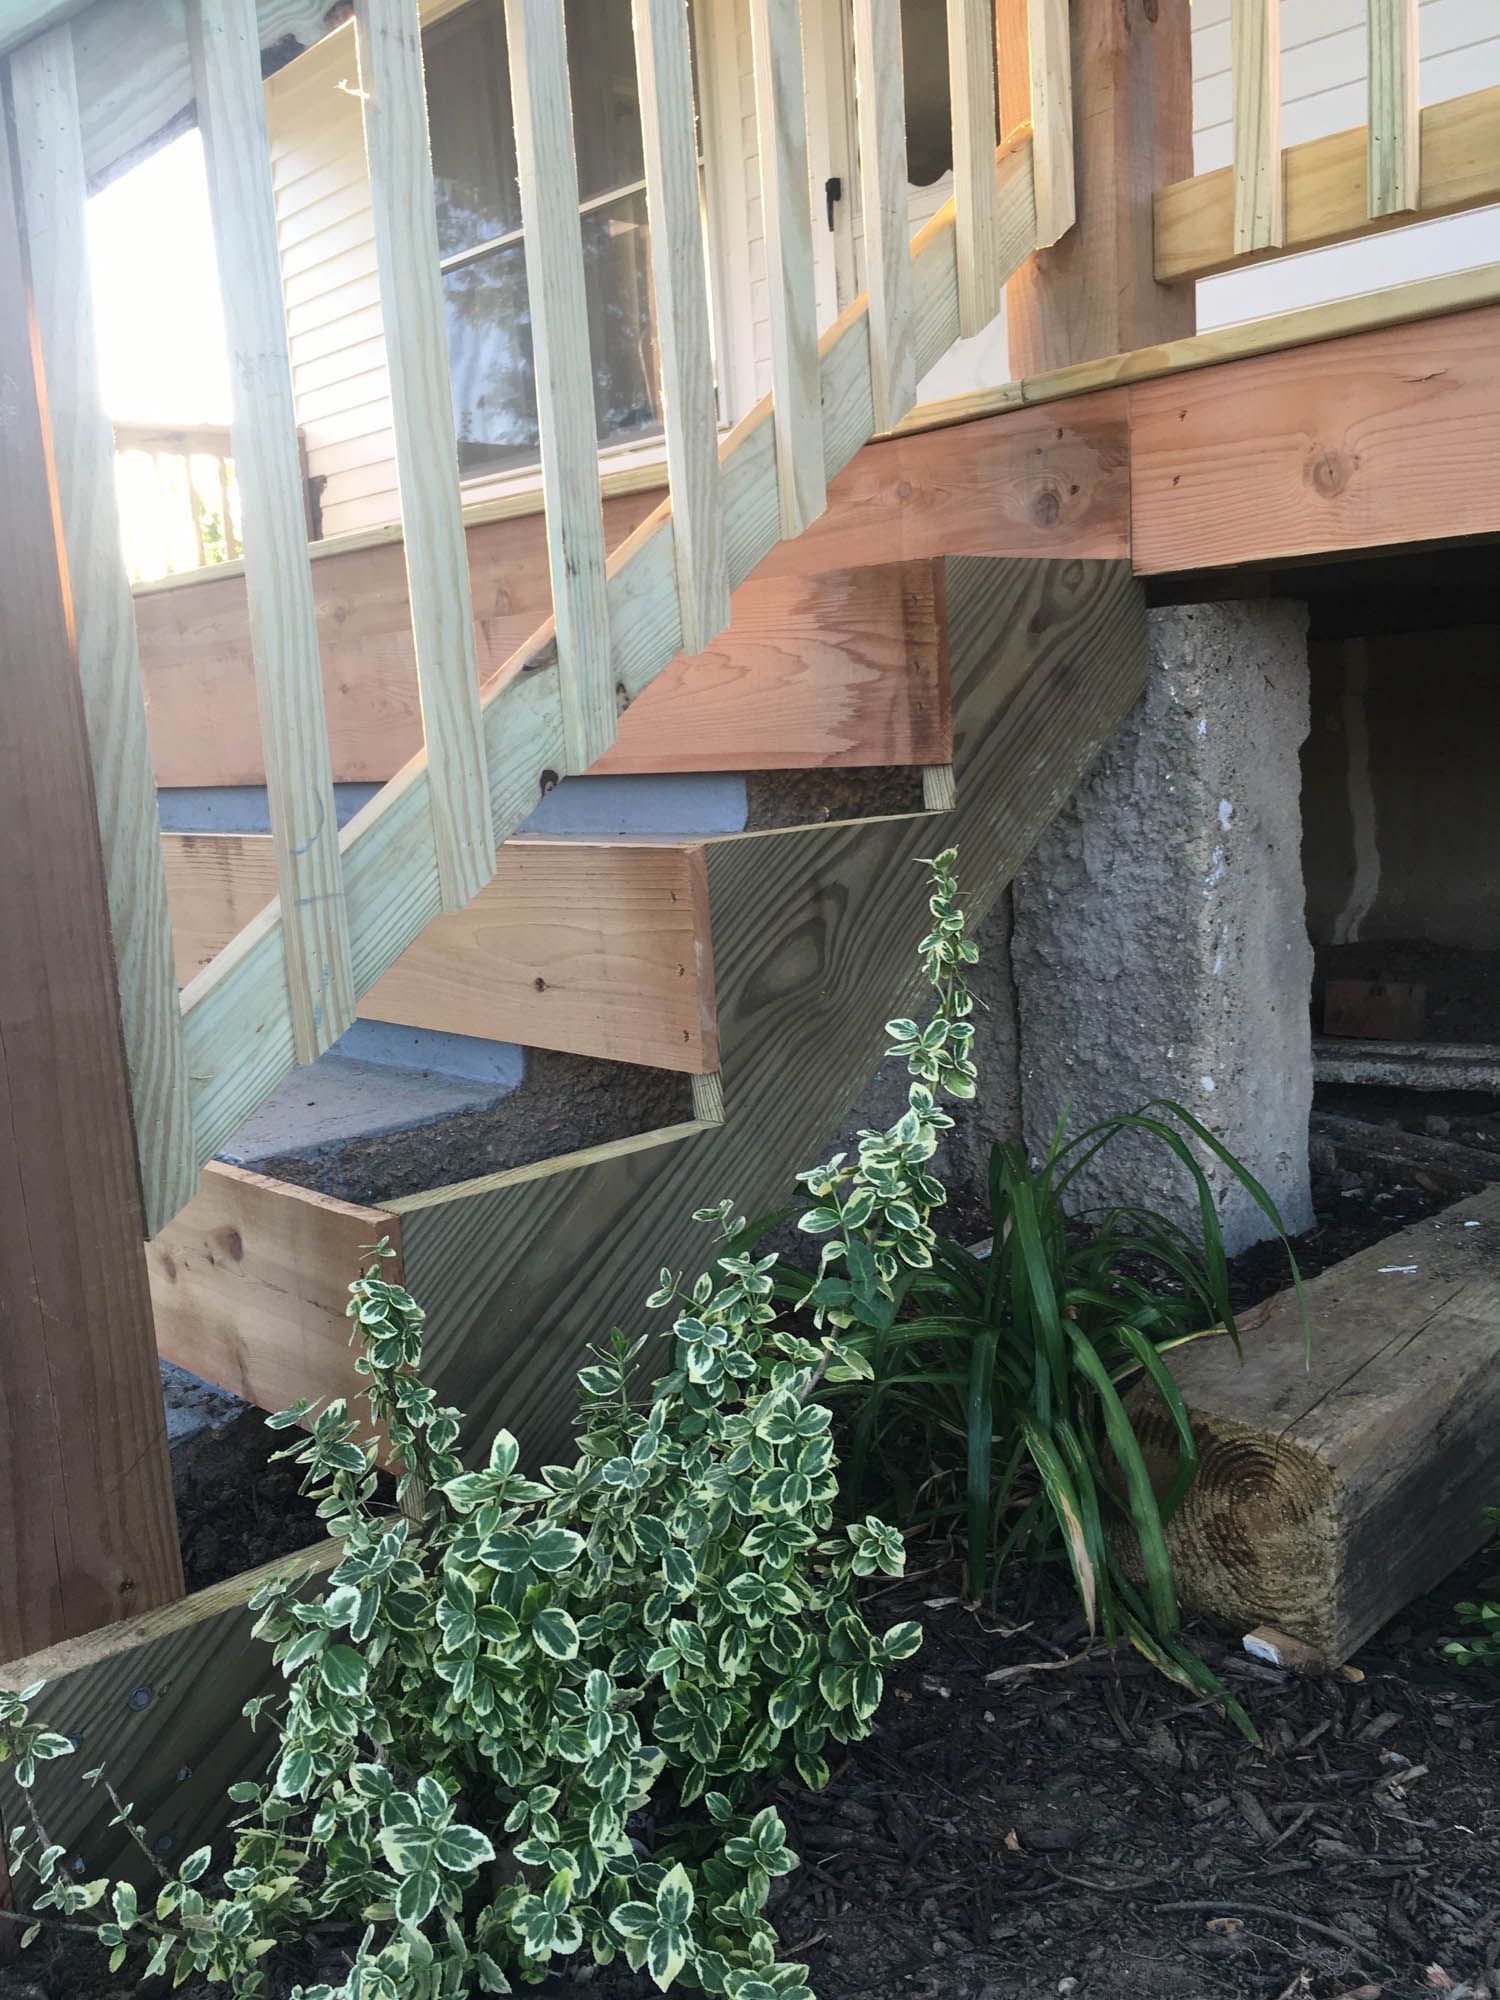 Cover Concrete Steps With Wood